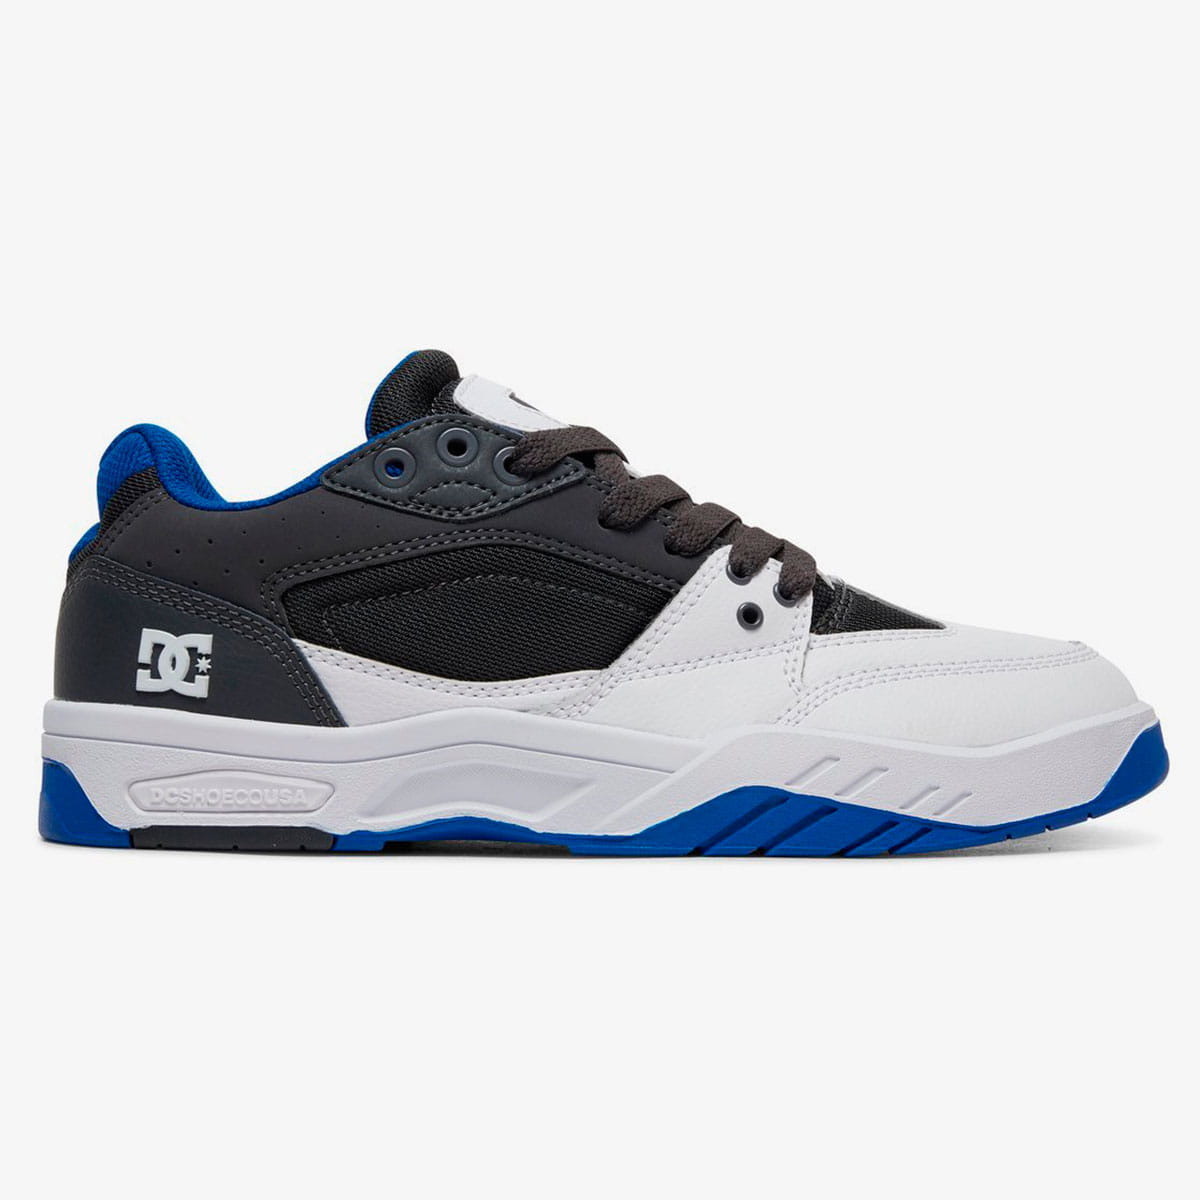 ADYS100473 DC Shoes Maswell Blue Black White Men/'s Skateboard Shoes